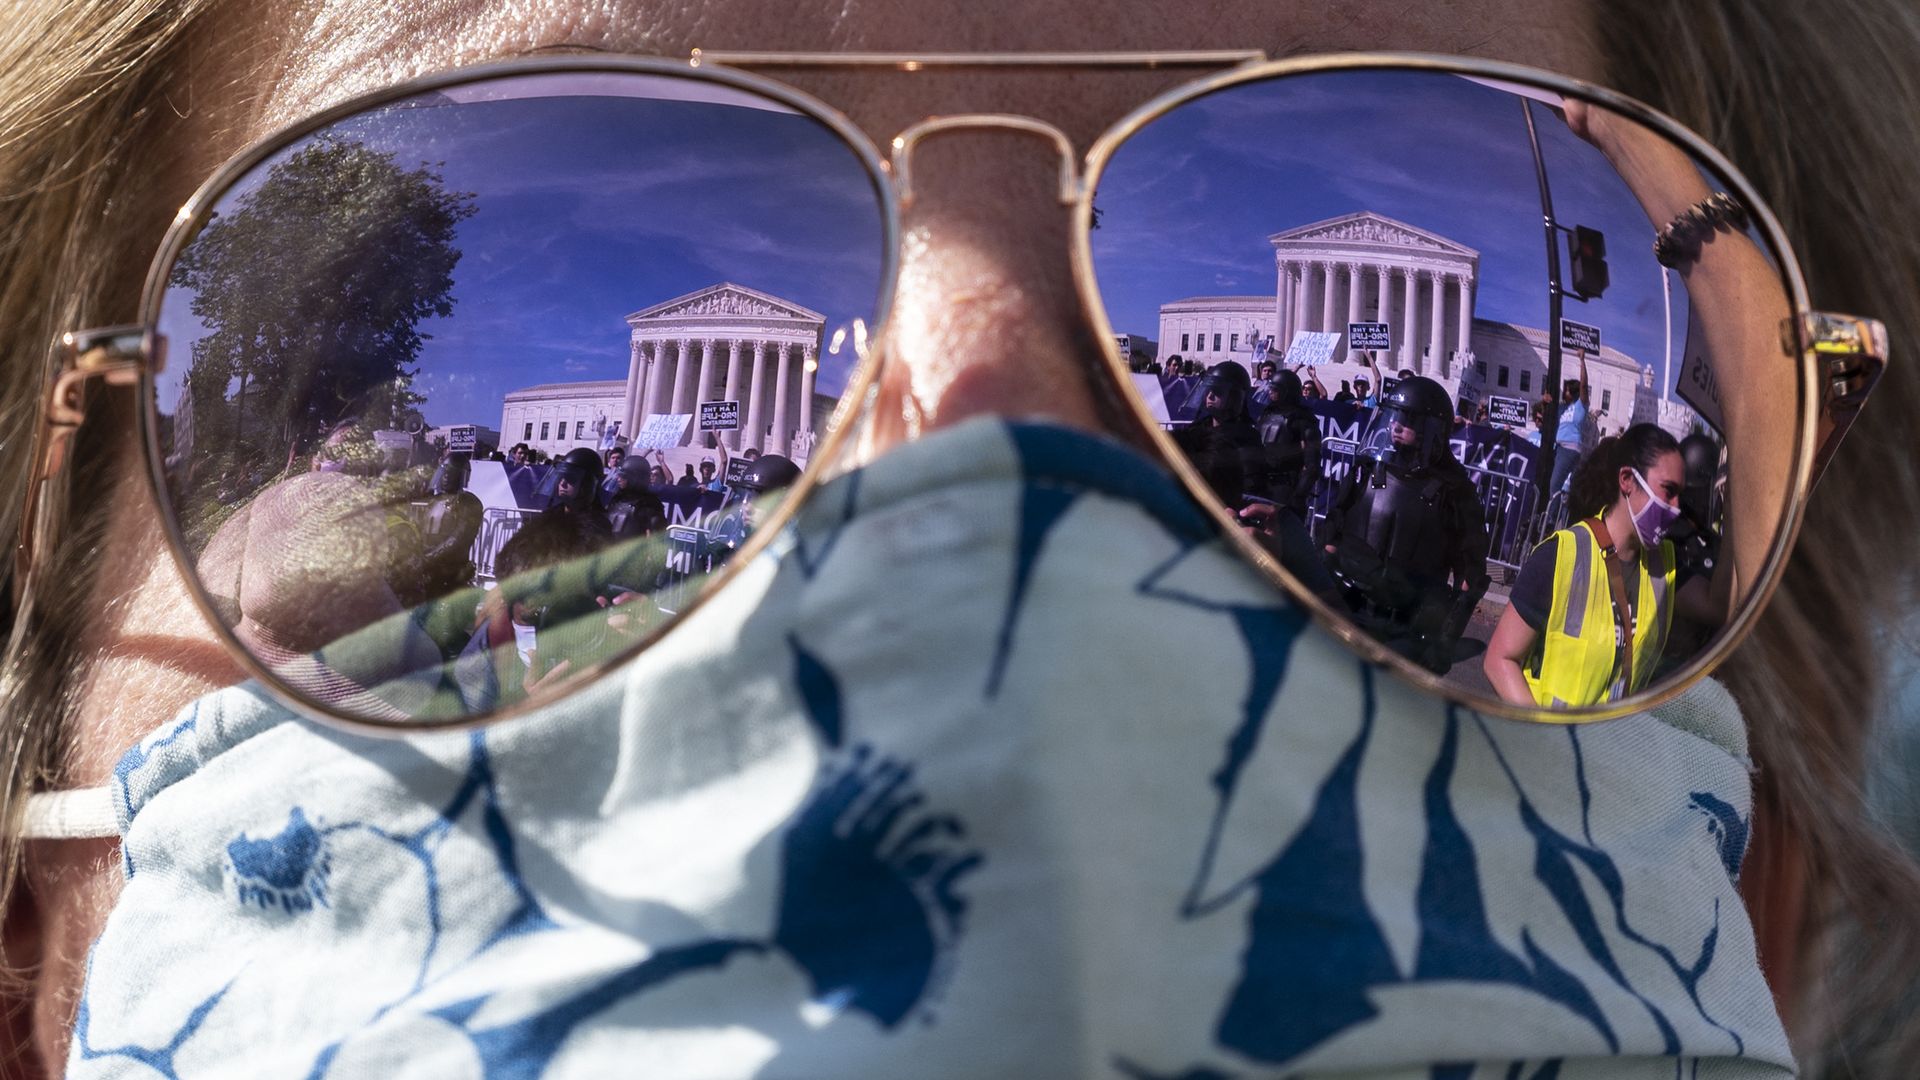 The US Supreme Court is reflected in a woman's sunglasses as protesters take part in the Women's March and Rally for Abortion Justice at the US Supreme Court.